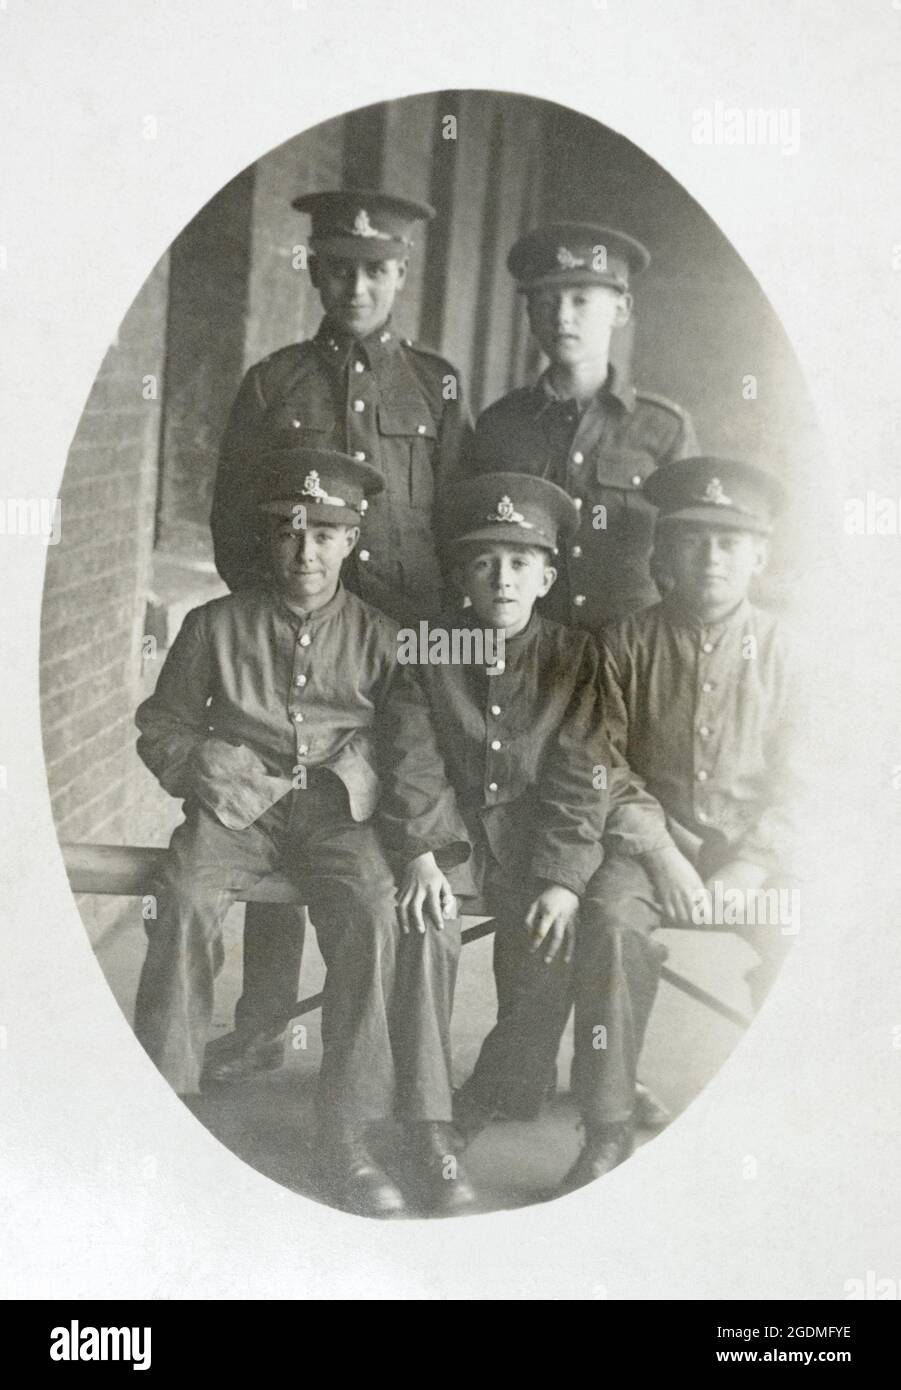 A potrait of five British Army boy soldiers in the Royal Artillery. From early 20th centuary, possbily from the First World War. Boy could be recruited into the army at this time from the age of 14, often serving as buglers and musicians. Stock Photo